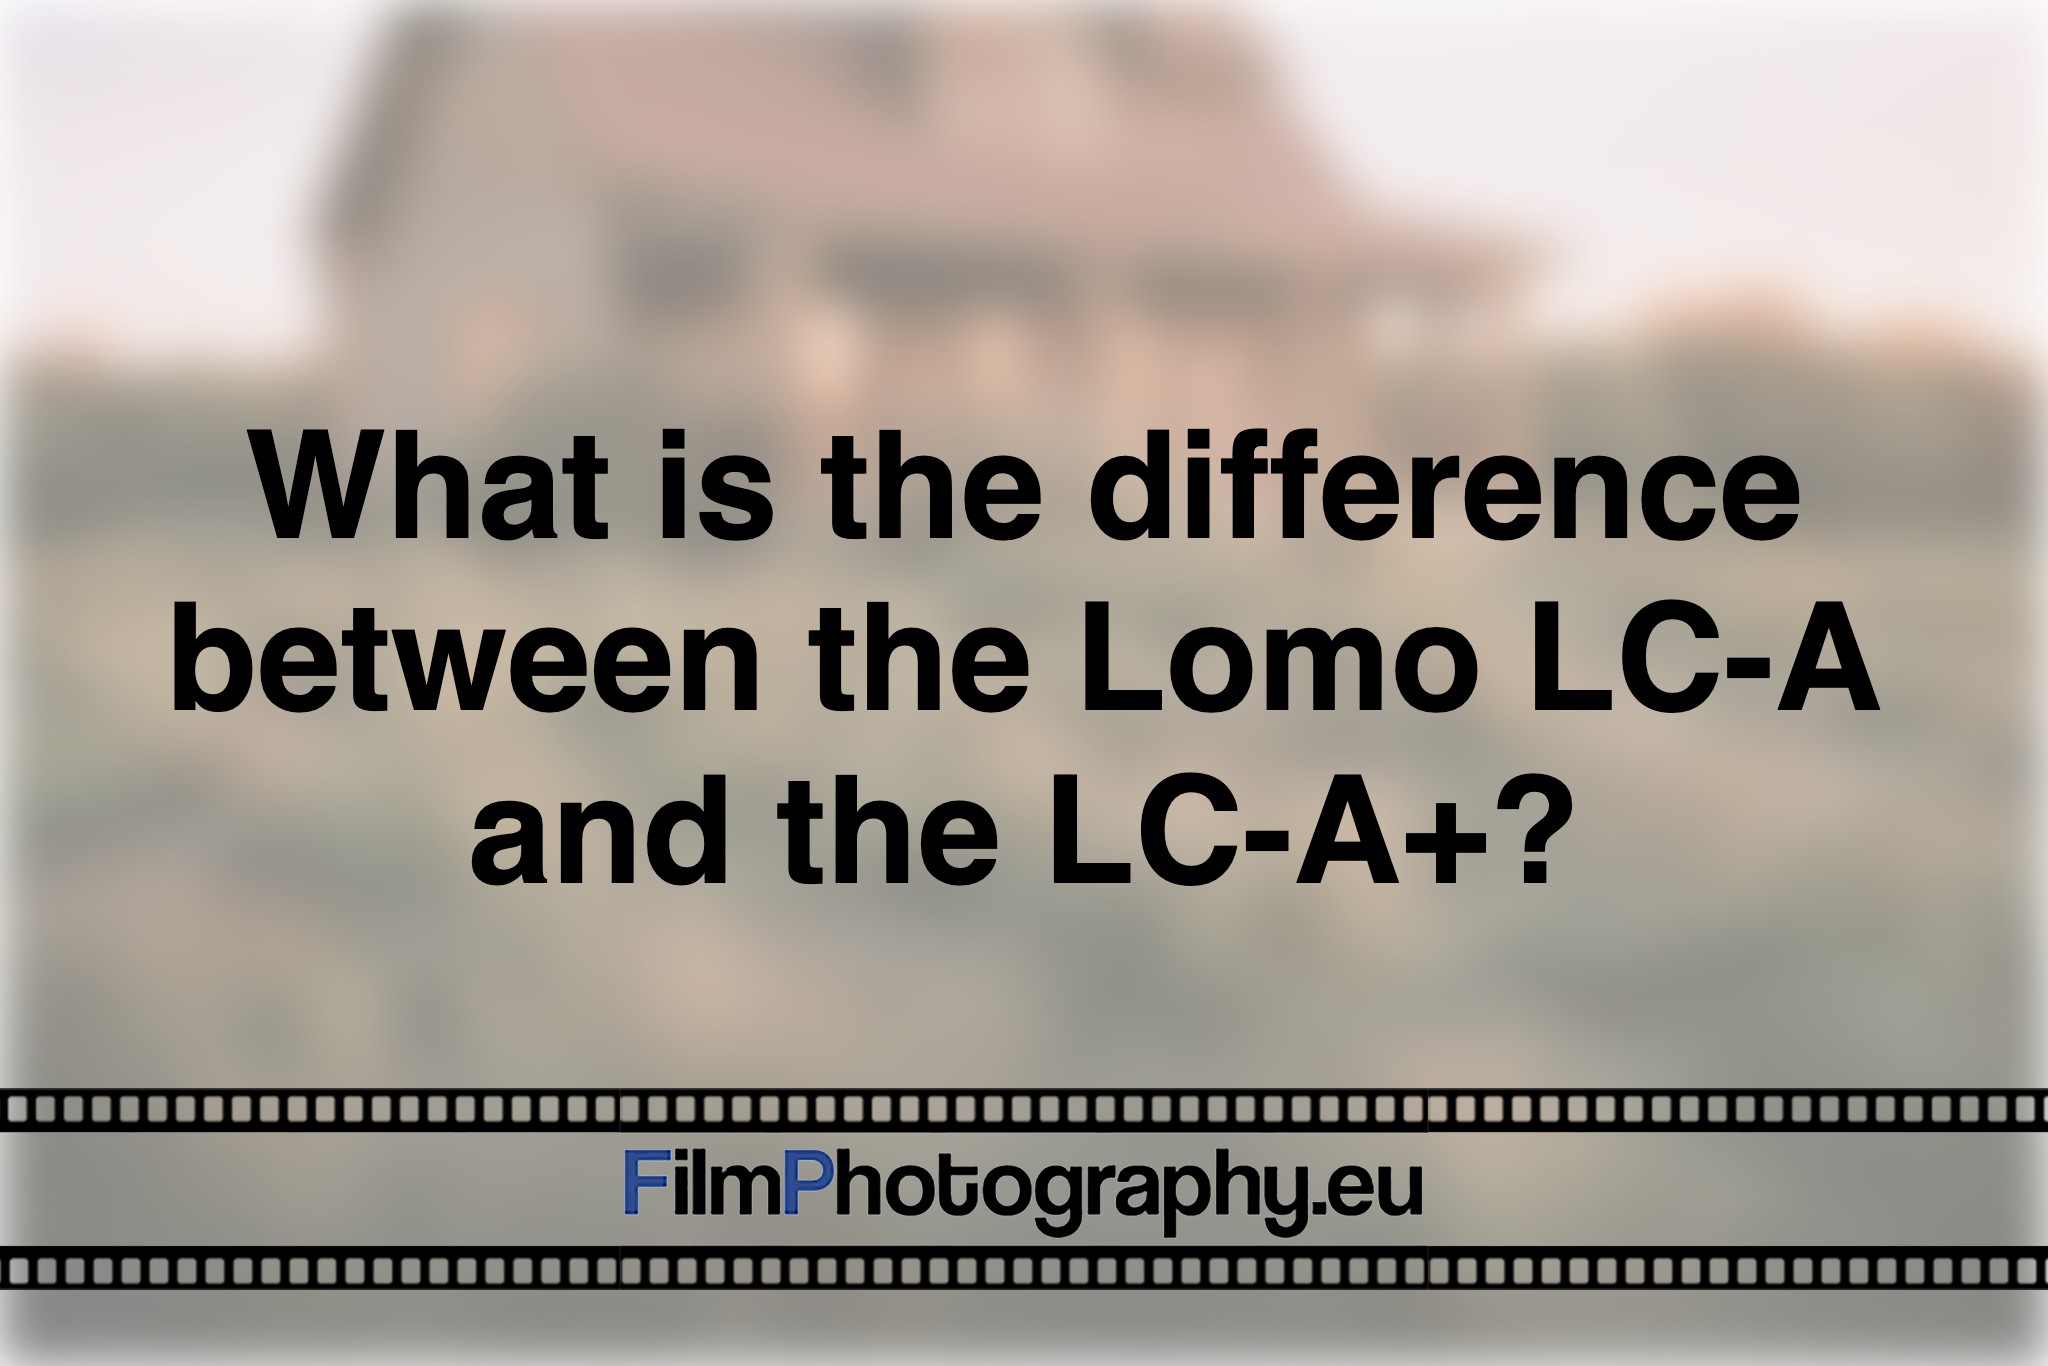 what-is-the-difference-between-the-lomo-lc-a-and-the-lc-a-photo-bnv